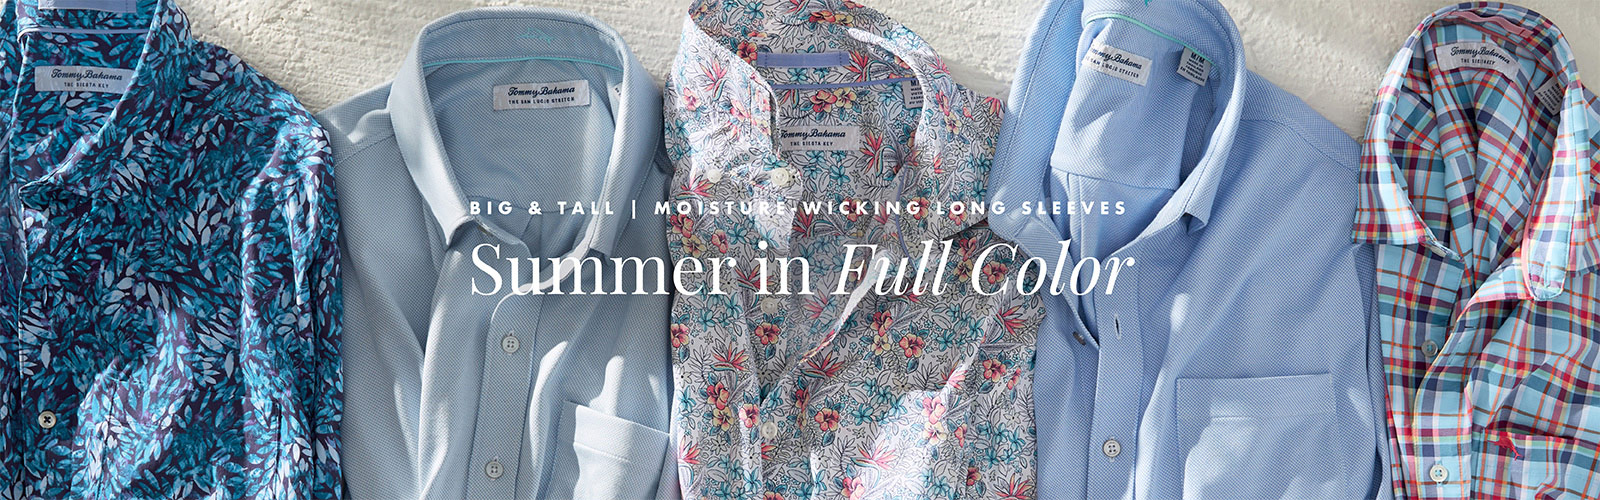 Big & Tall | Moisture-Wicking Long Sleeves: Summer in Full Color